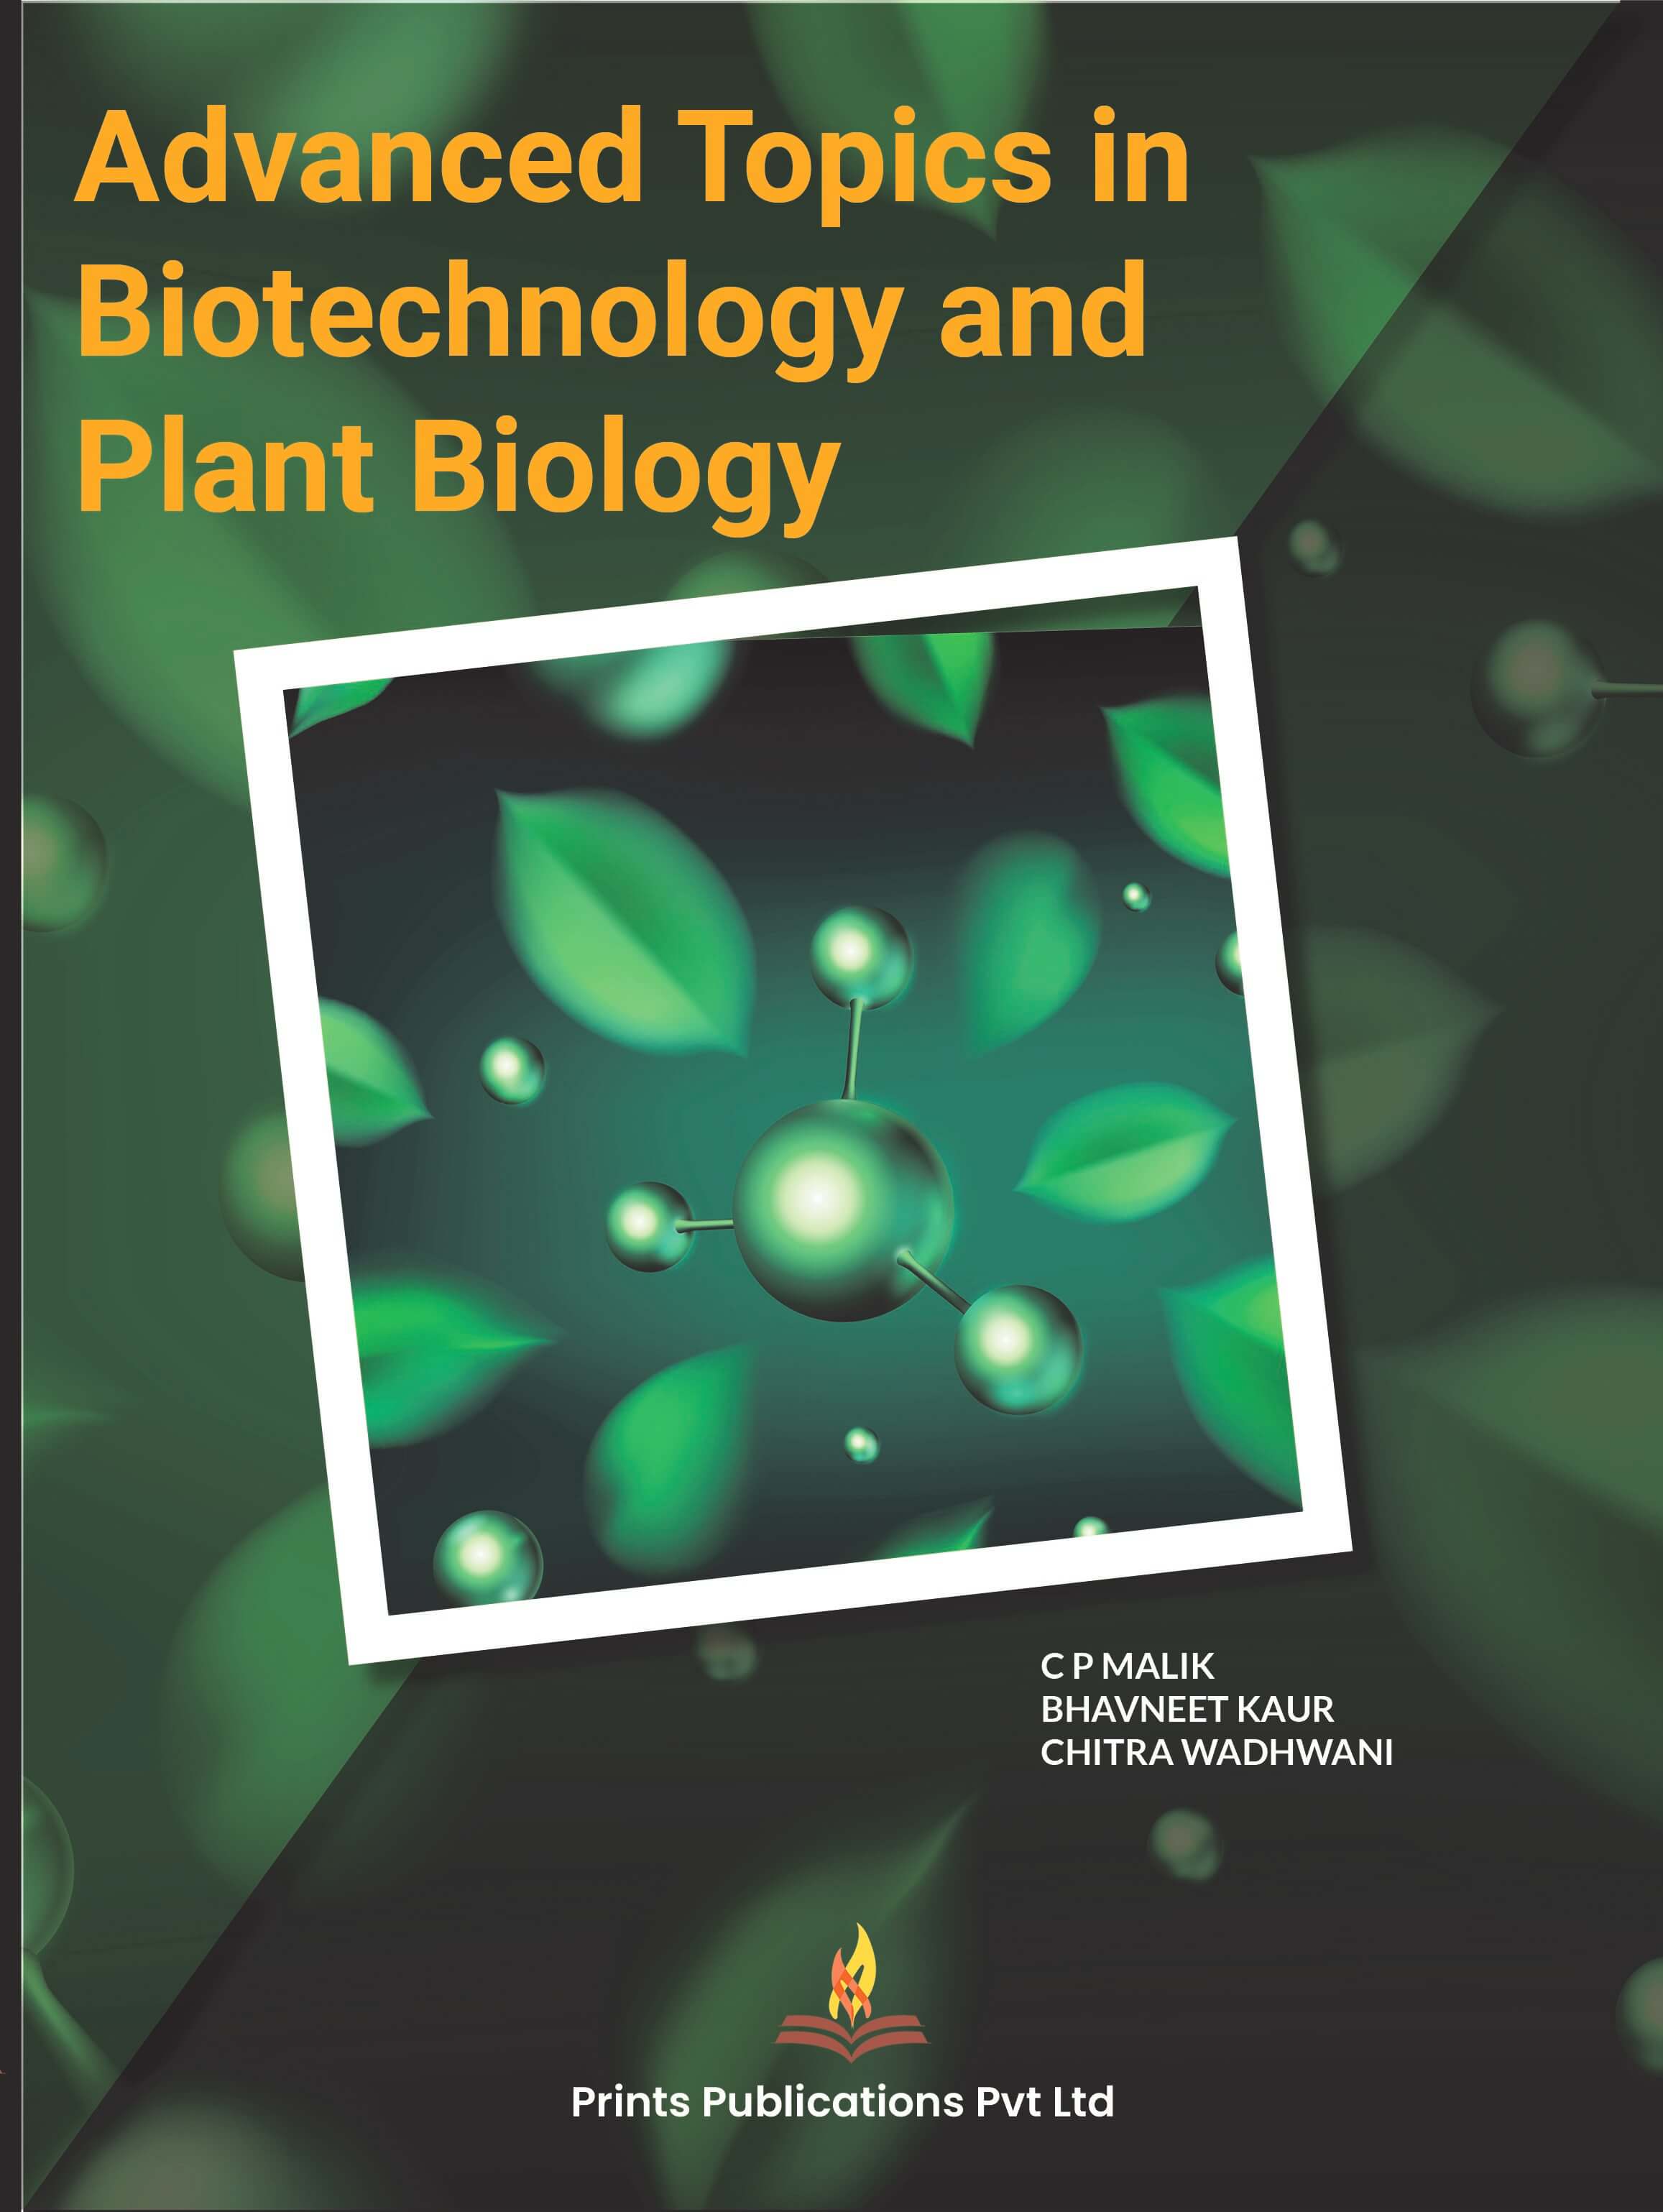 ADVANCED TOPICS IN BIOTECHNOLOGY AND PLANT BIOLOGY